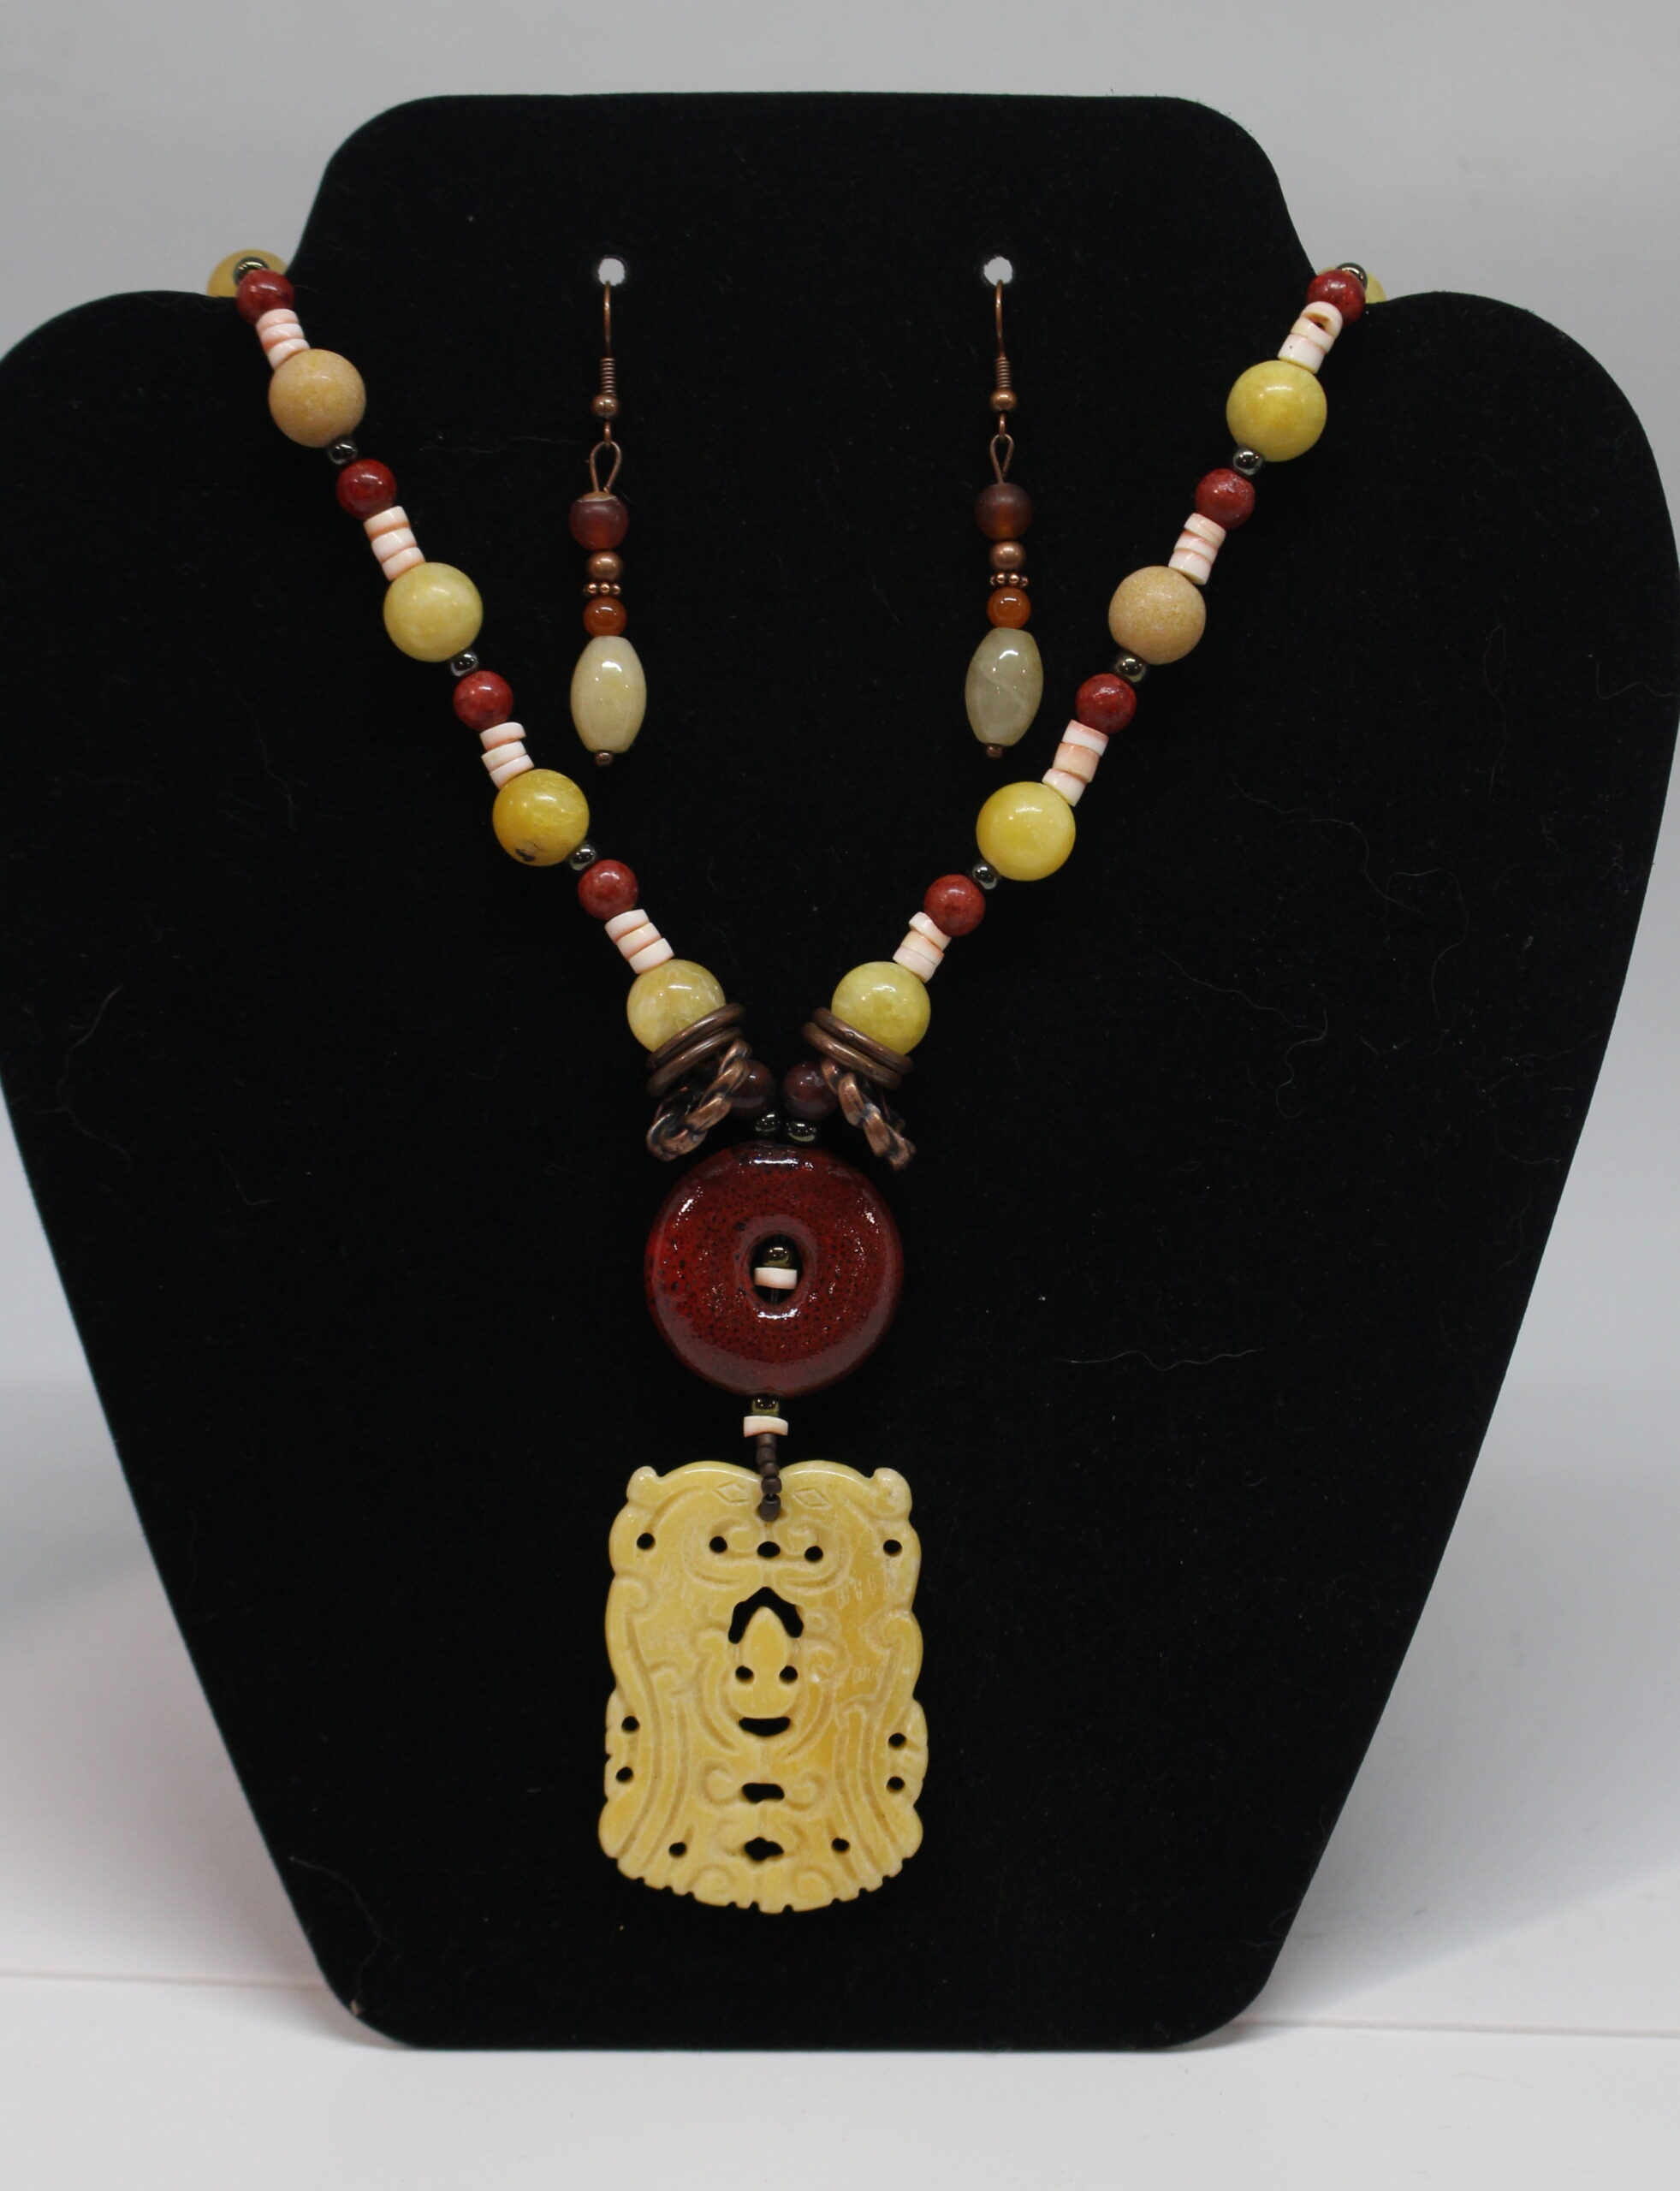 A necklace and earring set with a yellow jade pendant.